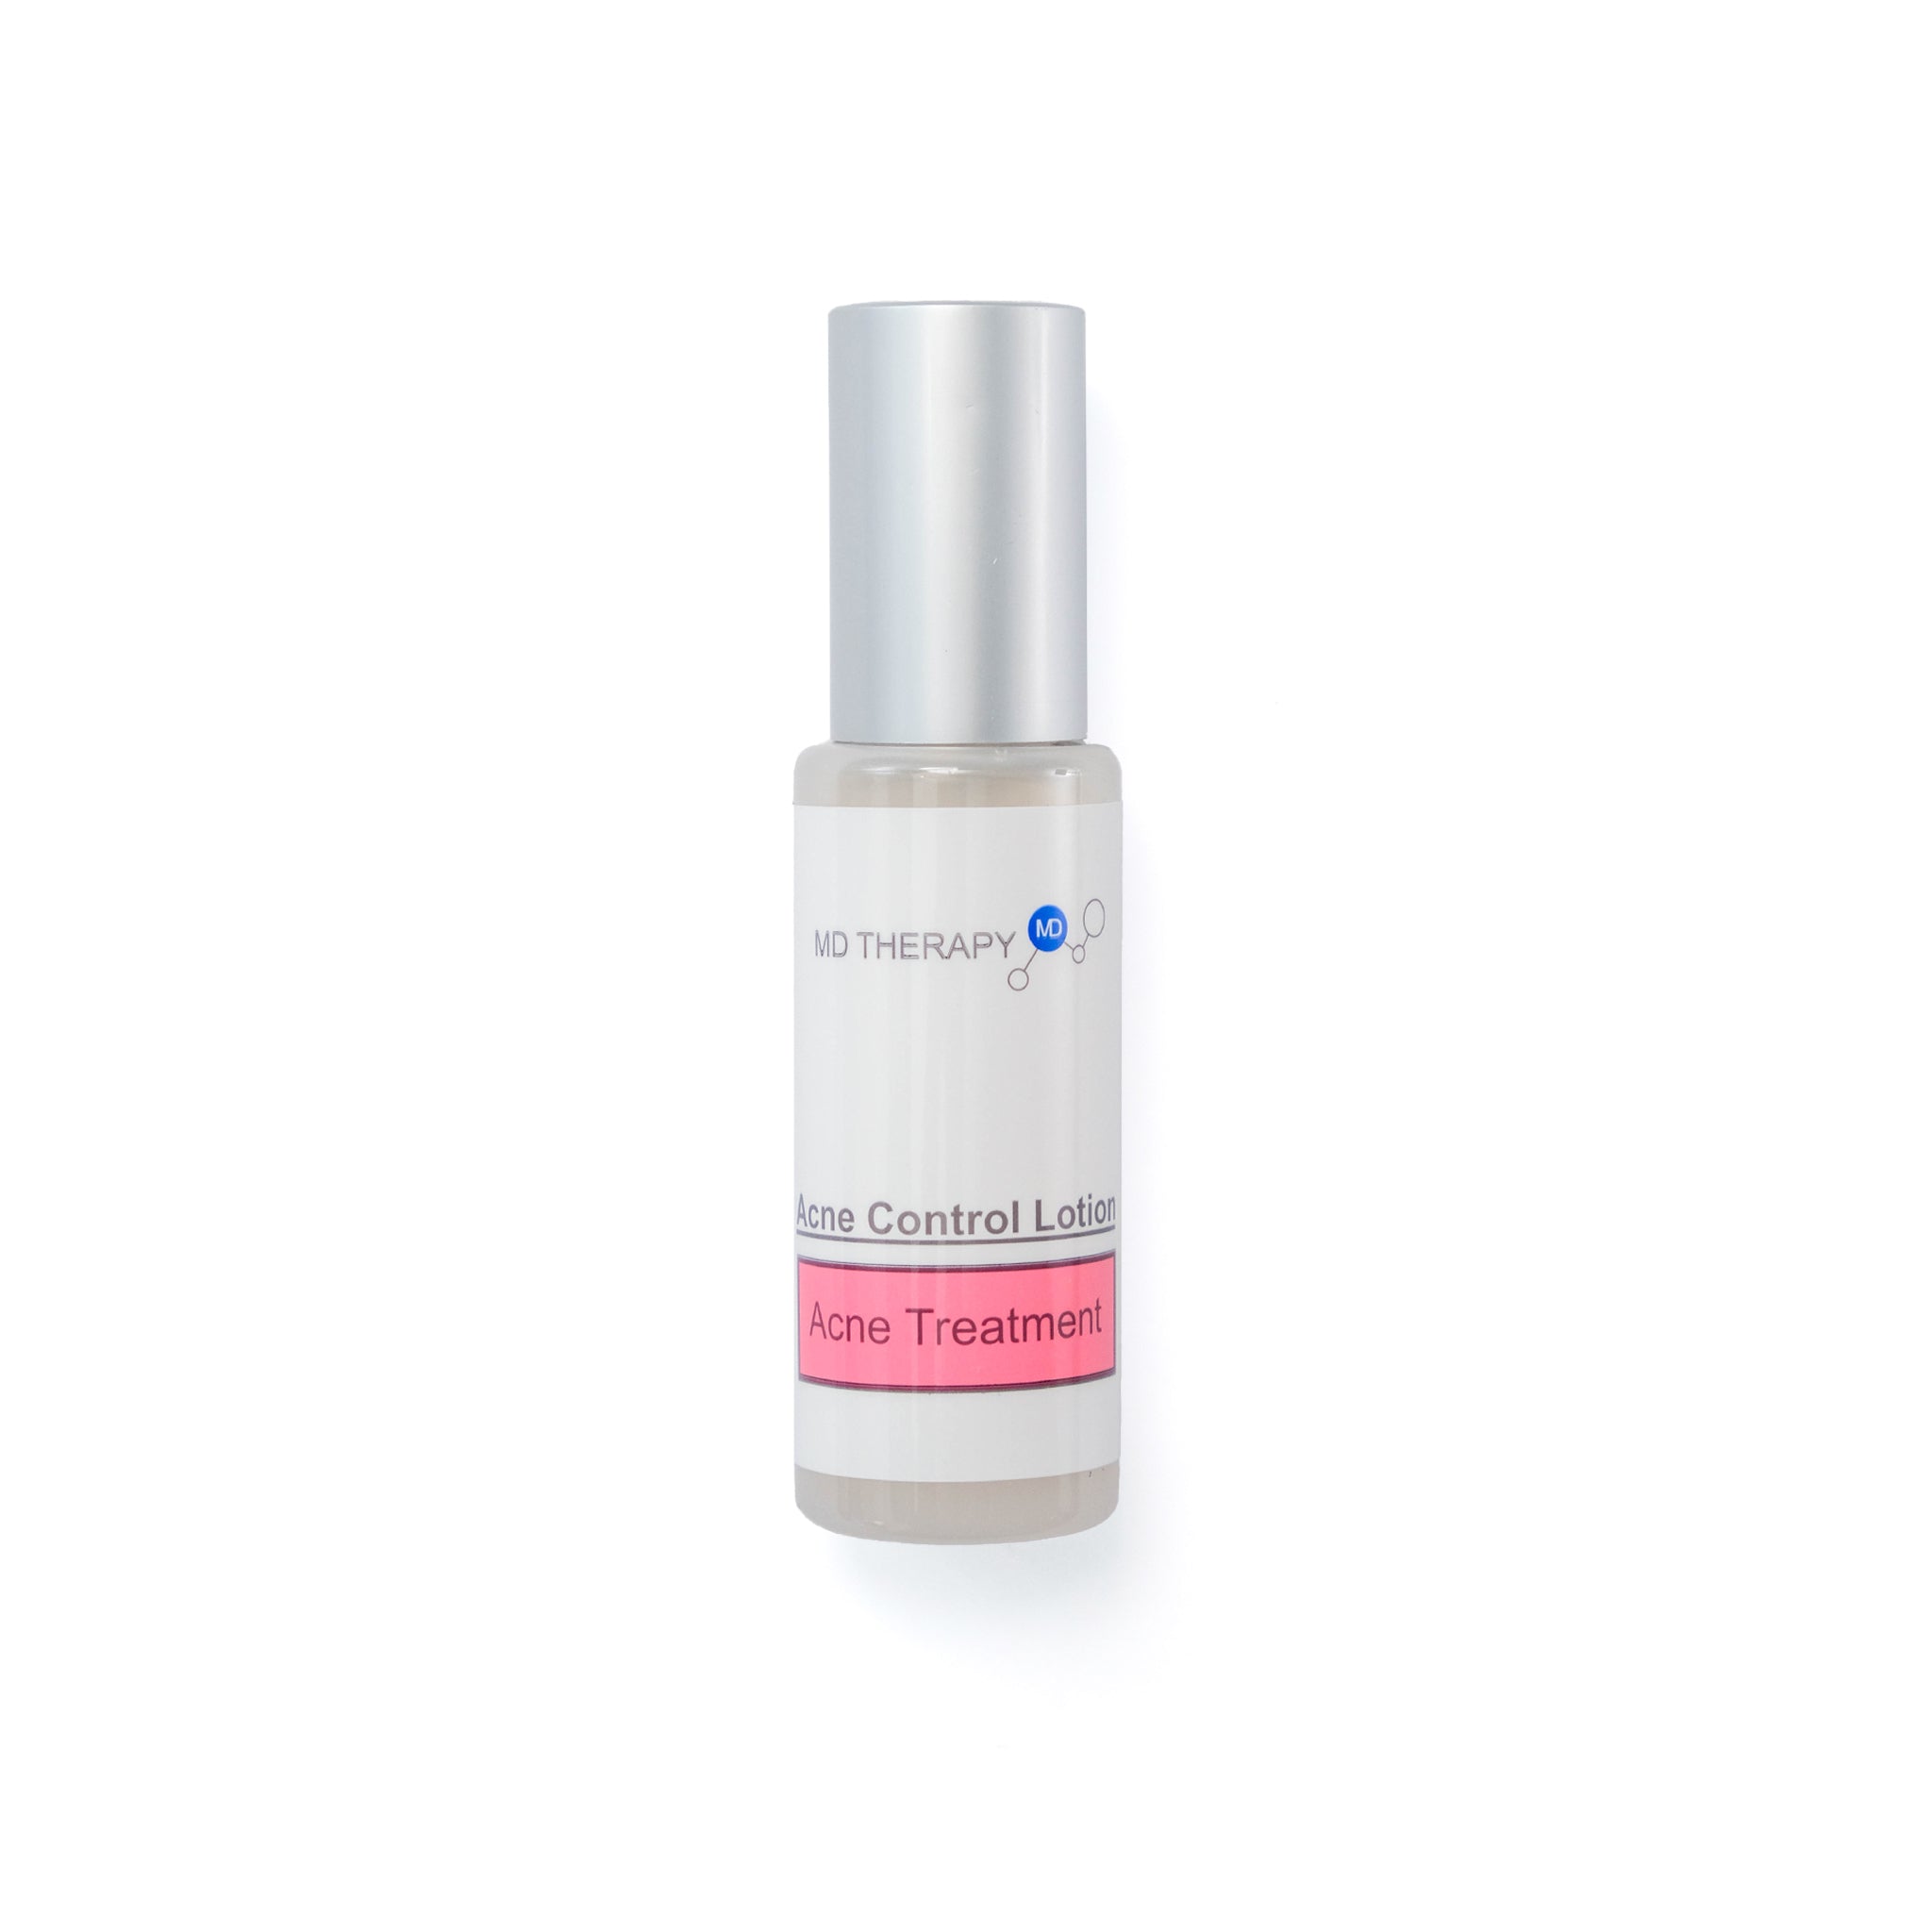 Acne Control Lotion